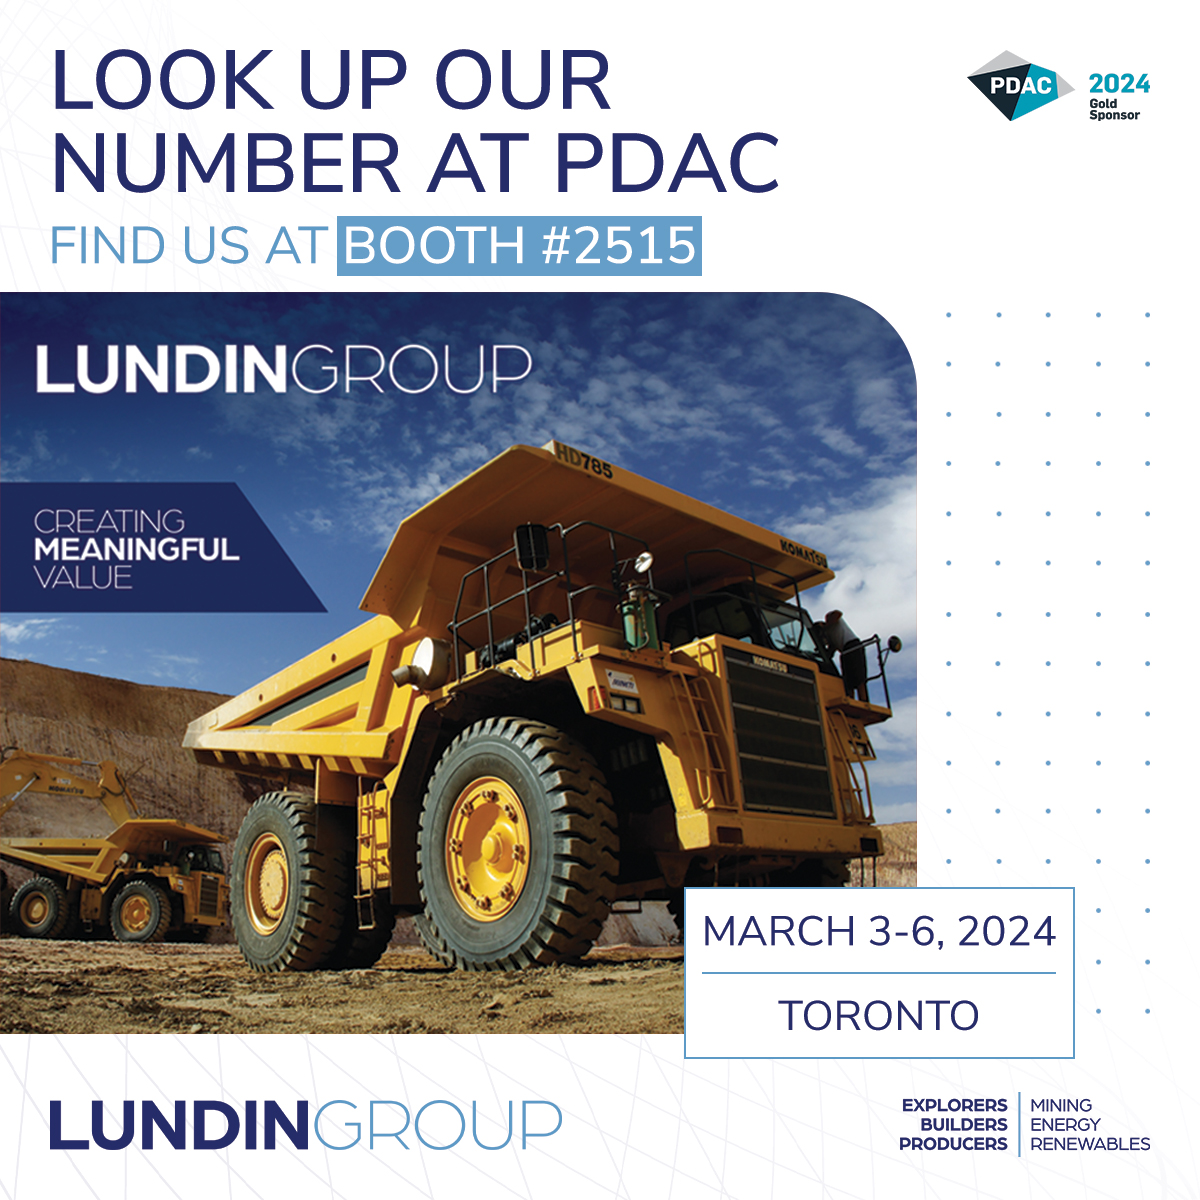 Our portfolio produces metals and minerals deemed precious and critical. Our commodity exposure is diverse, but Lundin Group companies share a singular purpose: creating meaningful value for shareholders and communities. Find us at Booth #2515 to learn more.